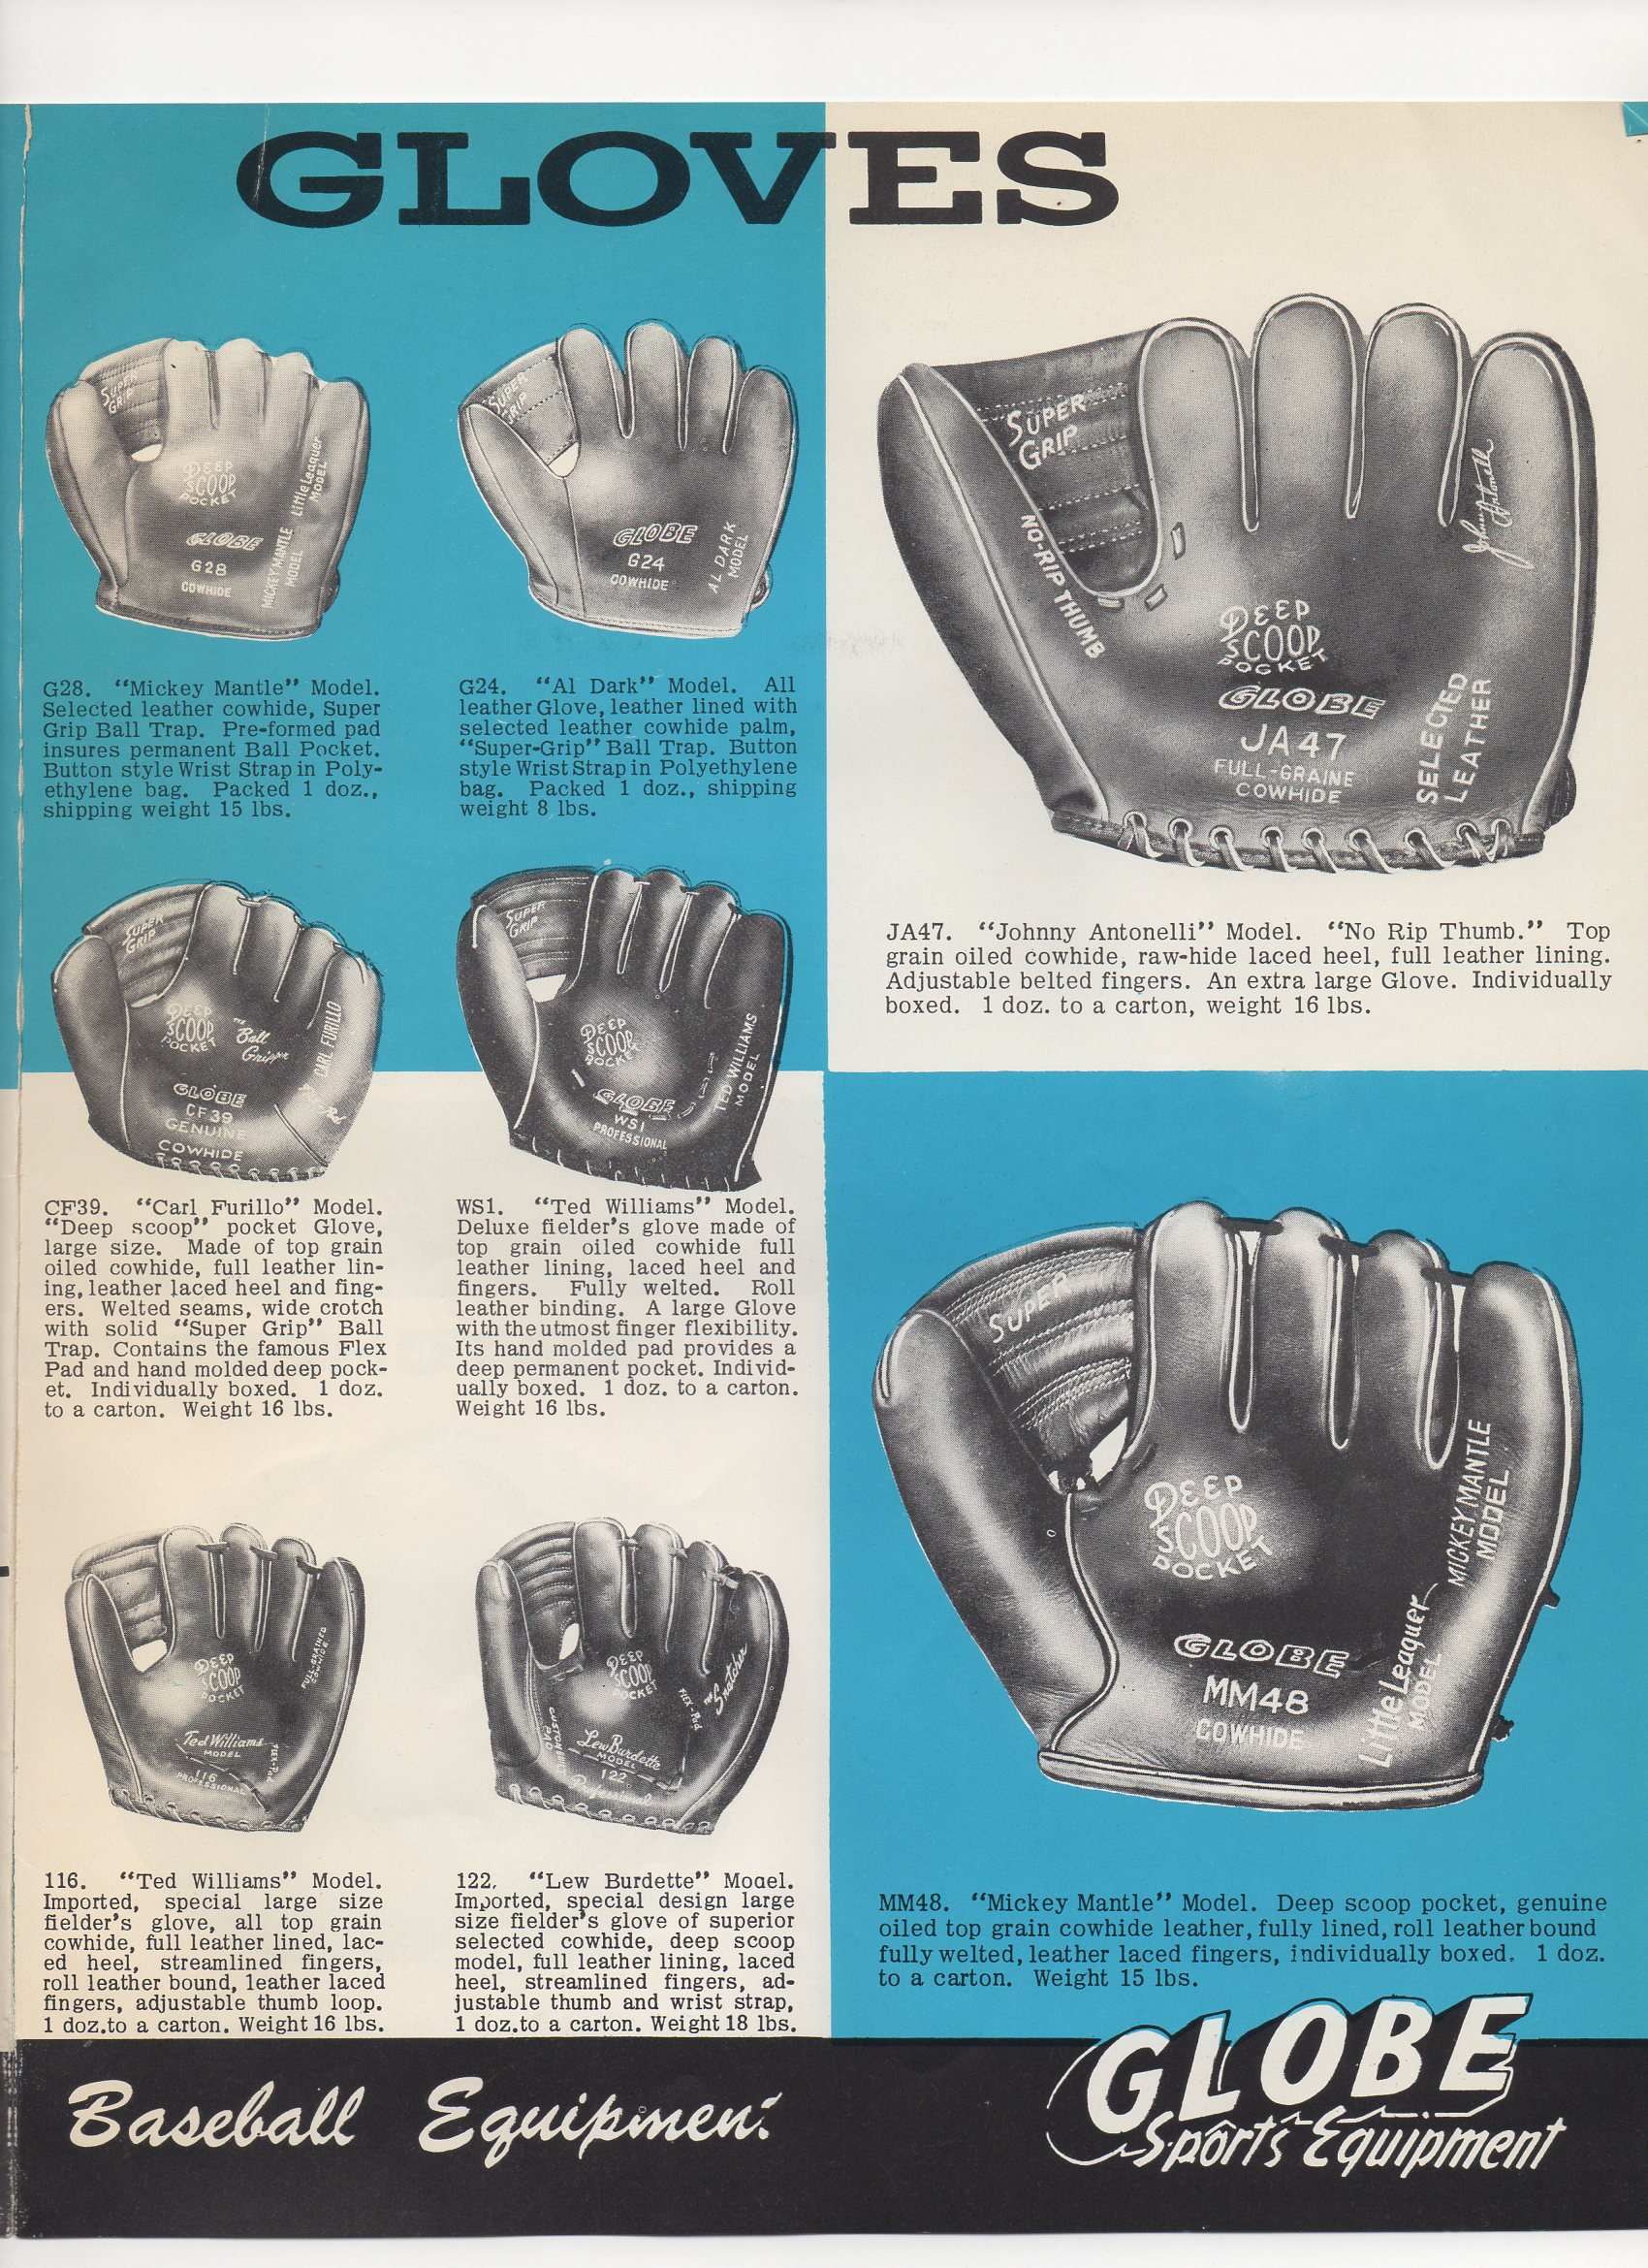 1958 globe sports equipment, spring and summer